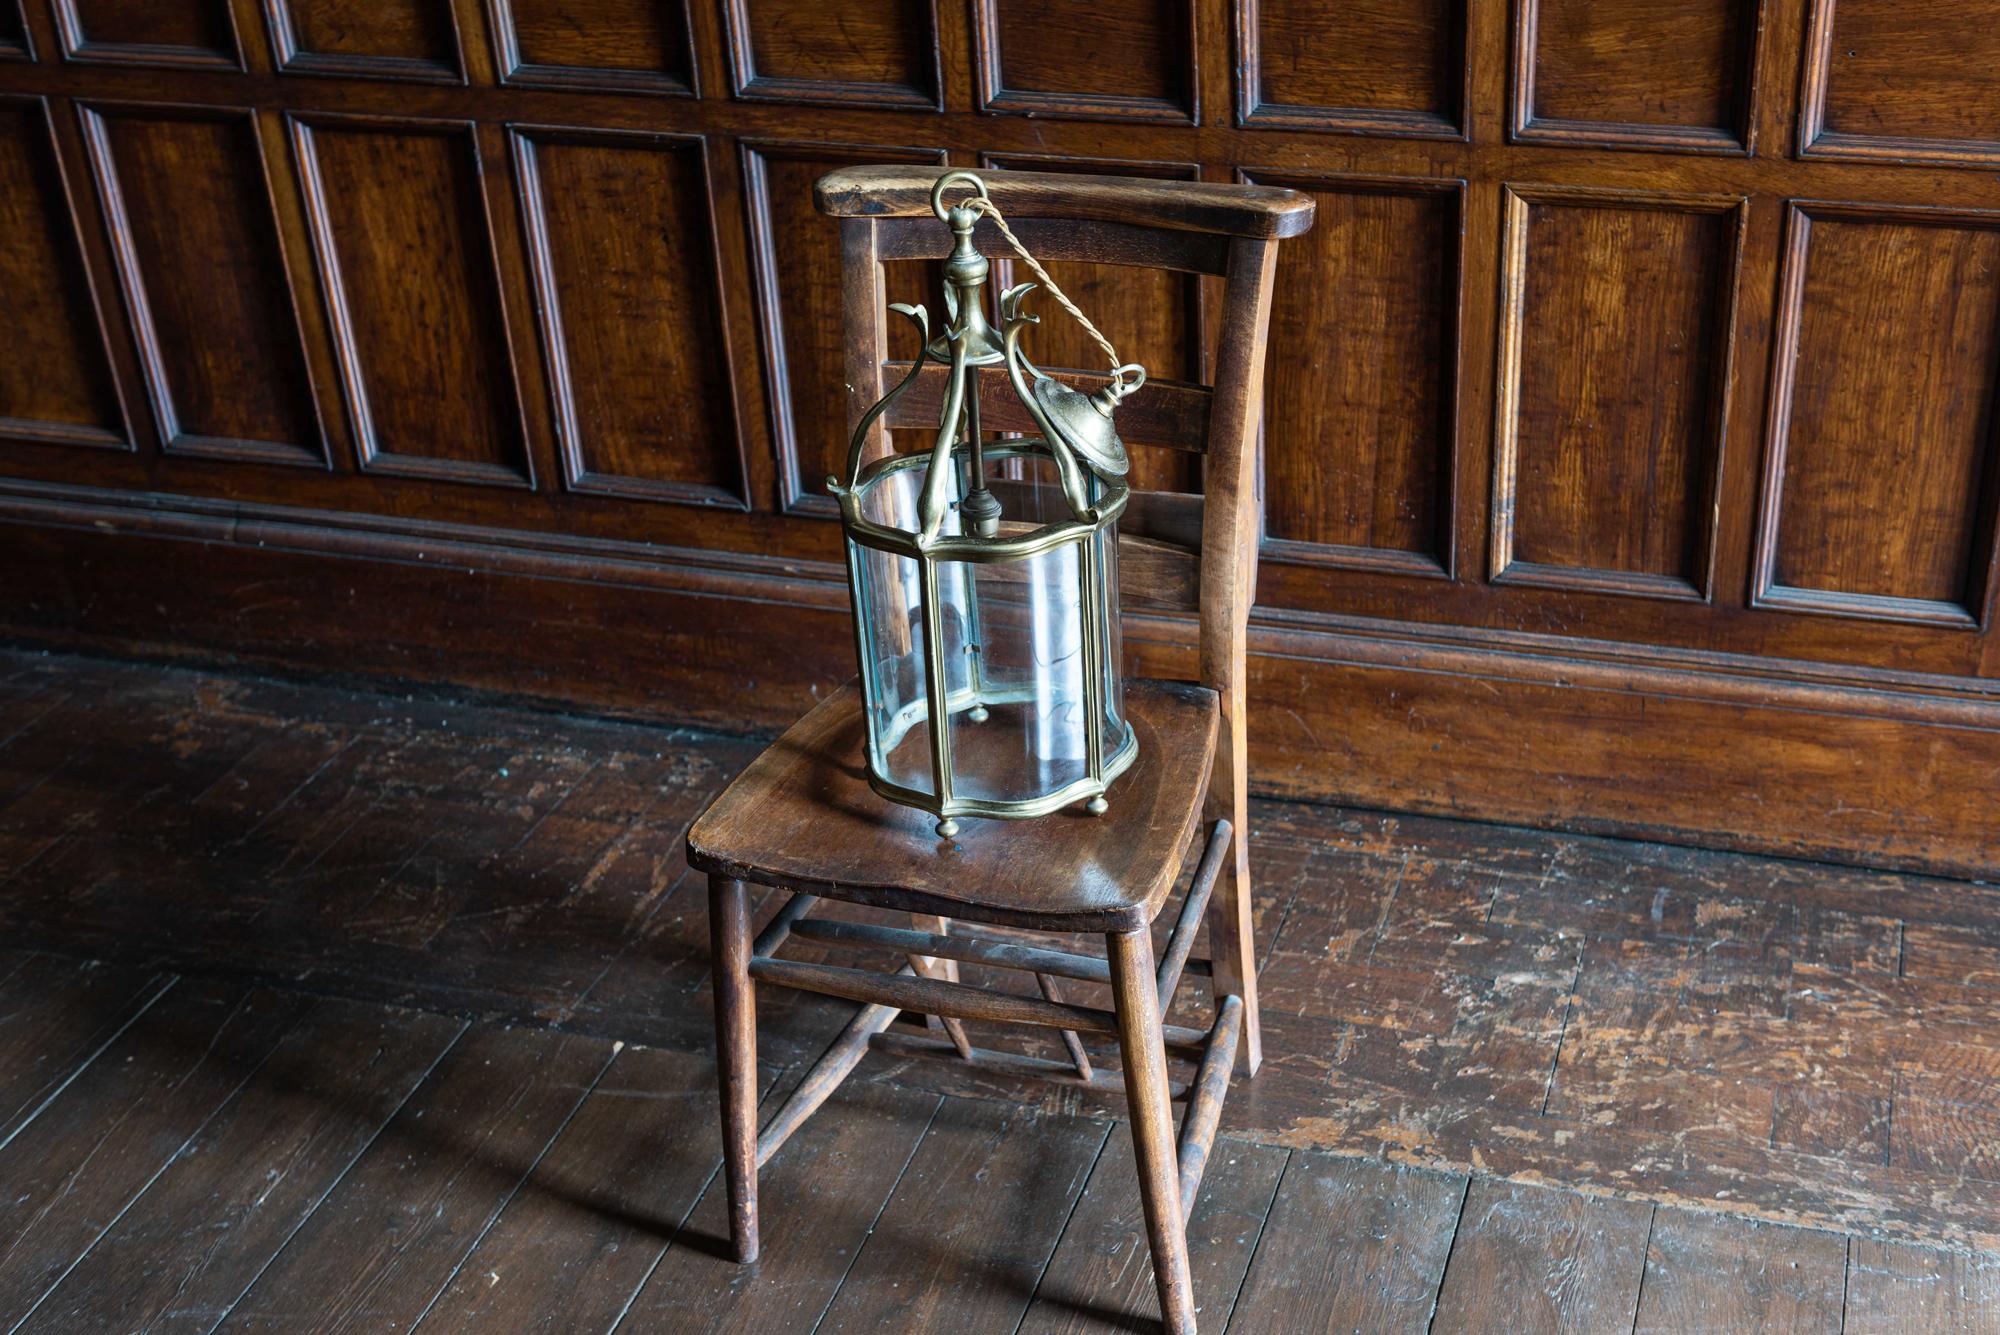 19th century English brass lantern by 'Faraday & Son London'
circa 1895.

An excellent example of a Faraday and Son Lantern one that you would expect from the fine British company. Excellent colour and worn patina, ornate in design with very